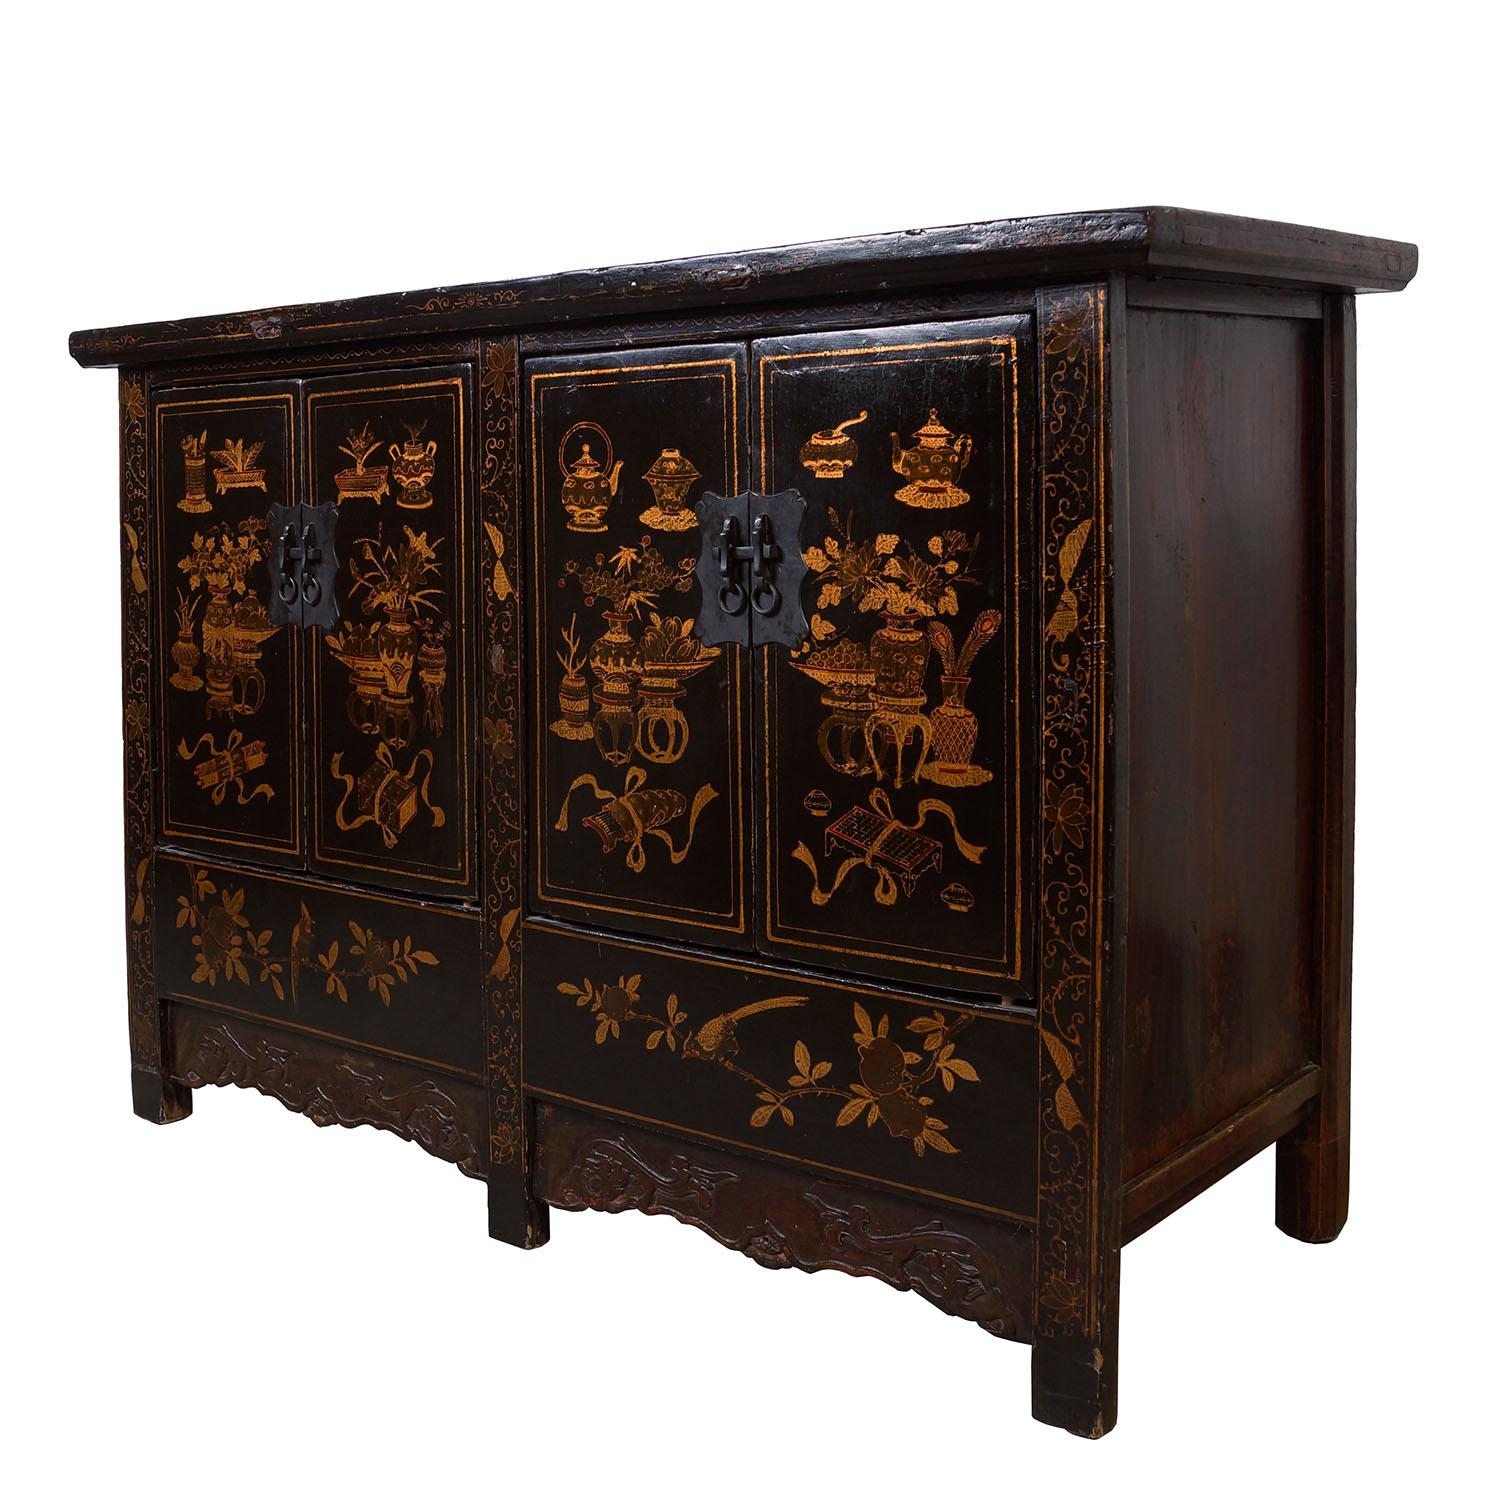 Size: 33 1/2in H x 50in W x 18in D?
Door opening: 19in H x 16in W each
Origin: China
Circa: 1850 - 1900
Material: Wood
Condition: Original finished, hand paint, solid wood construction, sturdy, heavy, normal age wear.
?
Description: Look at